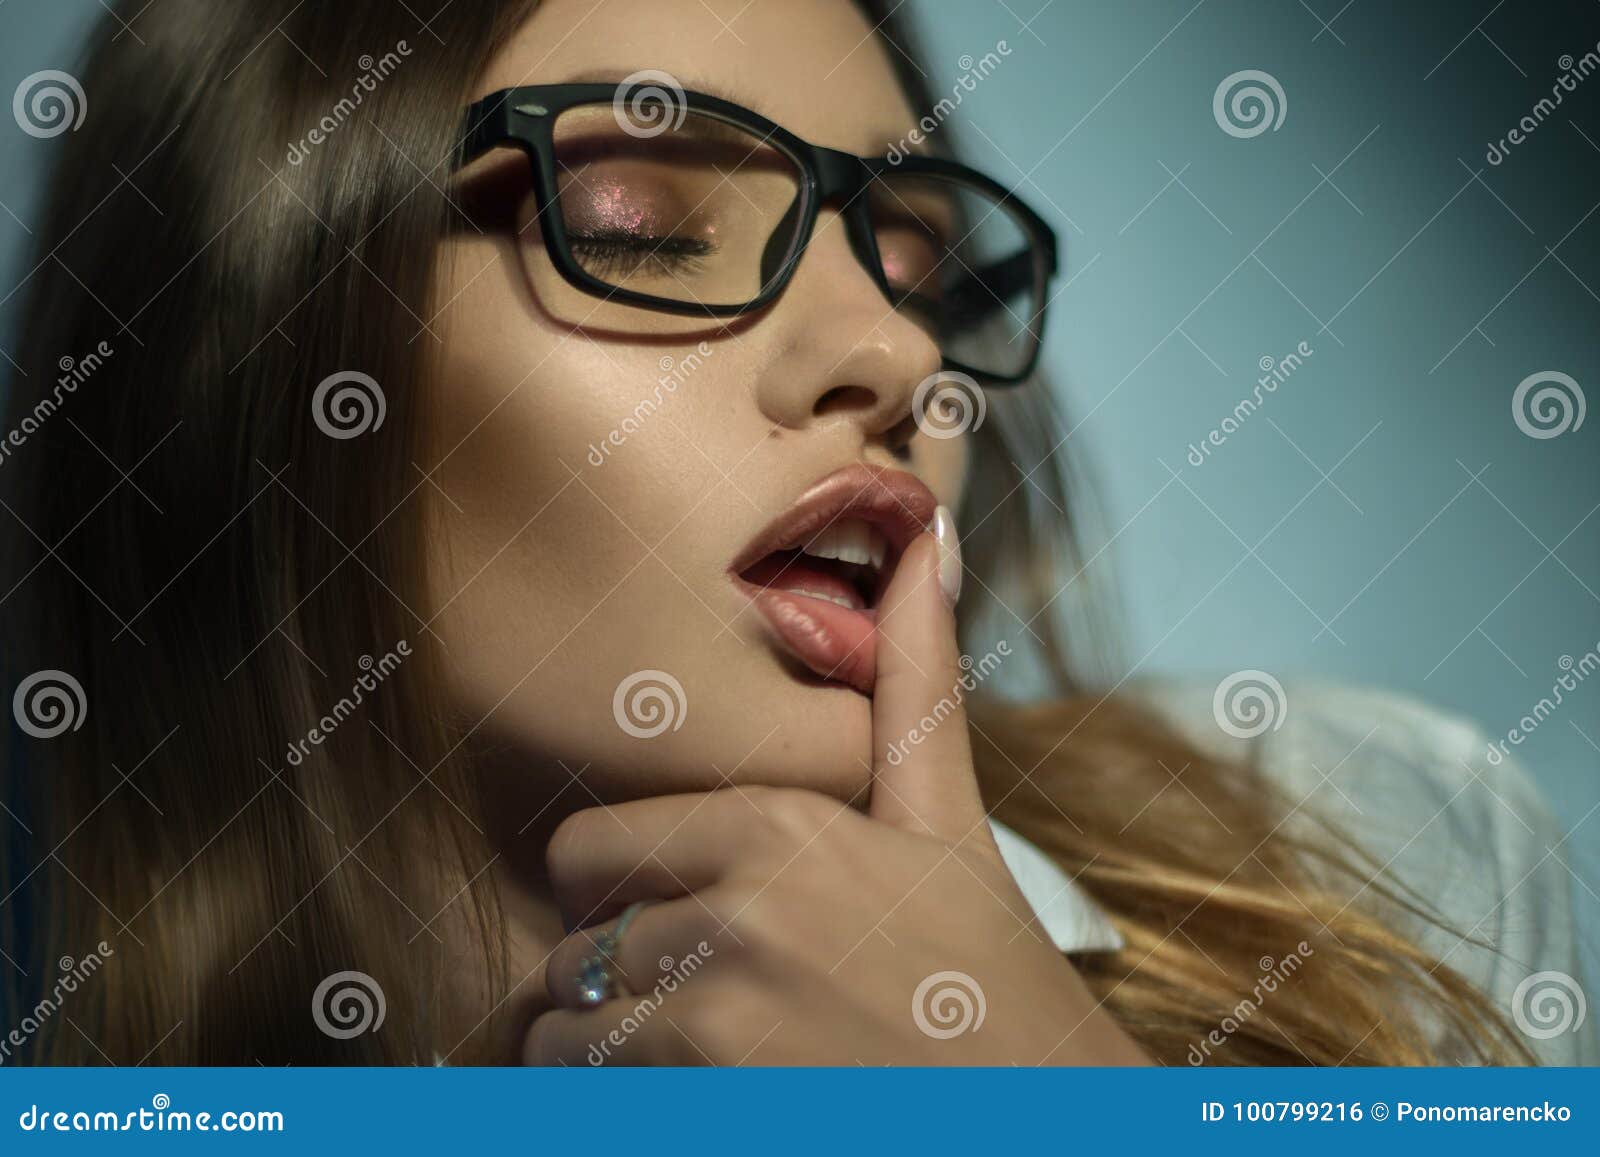 Sexy Finger In Mouth